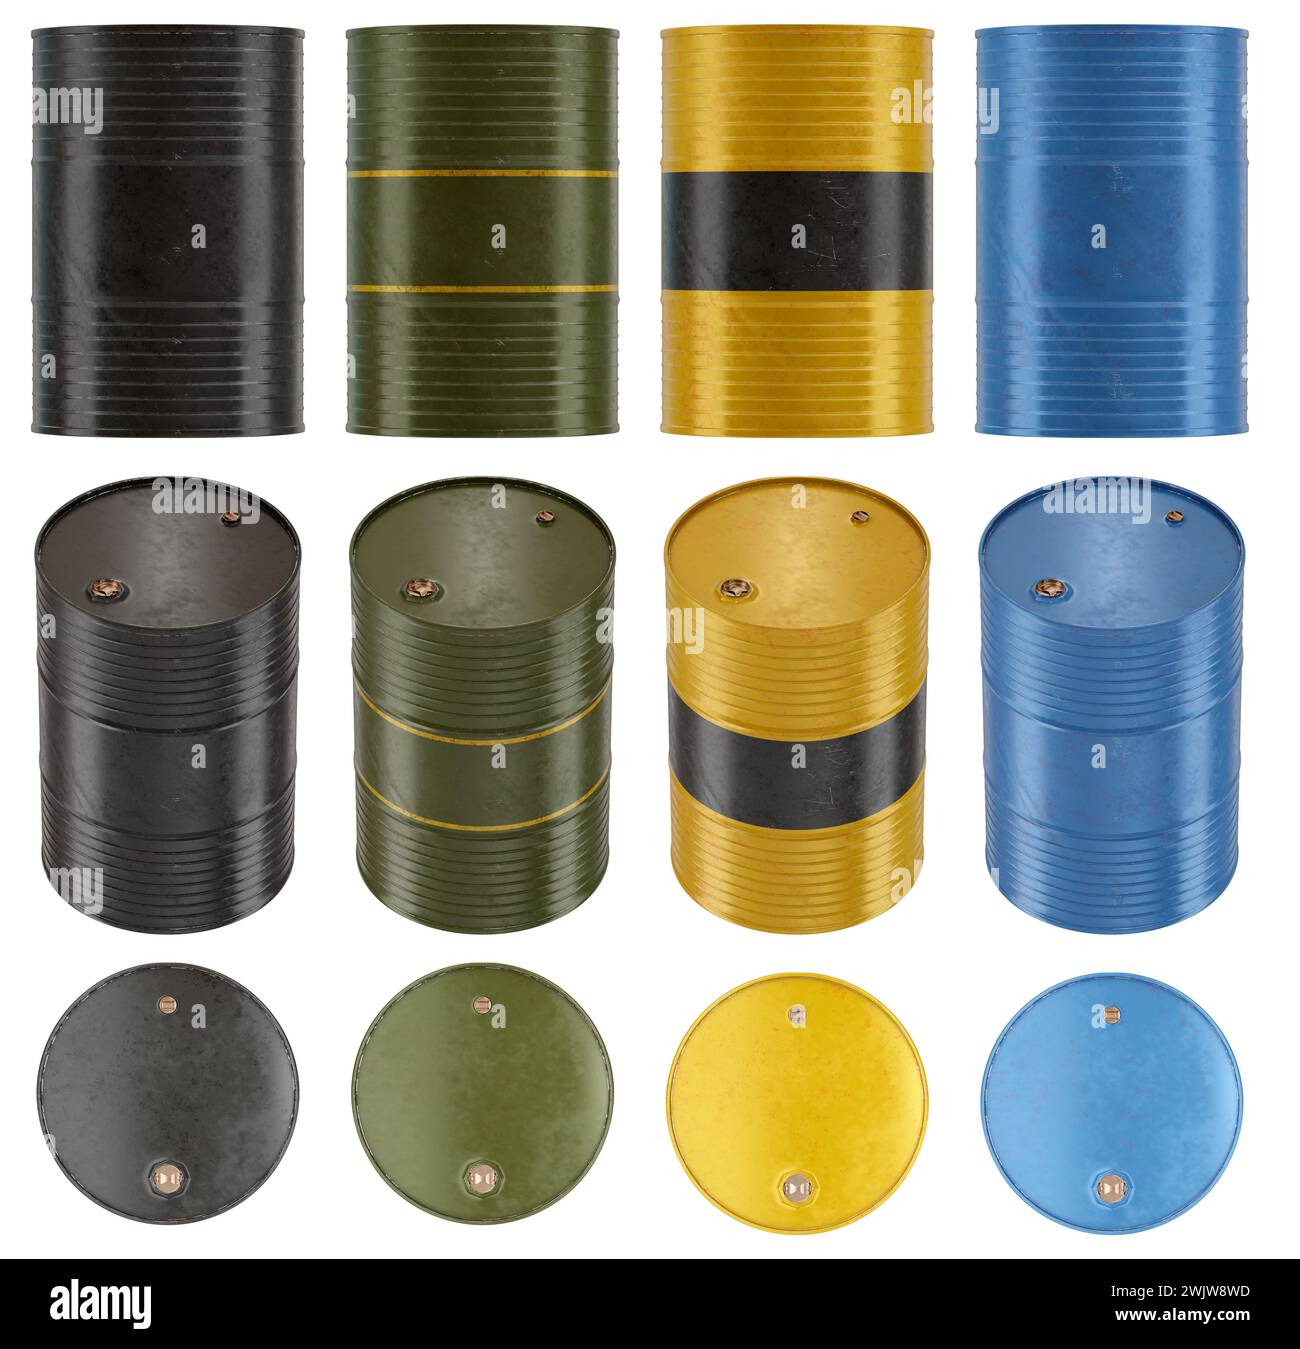 3d render illustration of a set of drum barrels in multiple views and colors. Isolated from background. Stock Photo